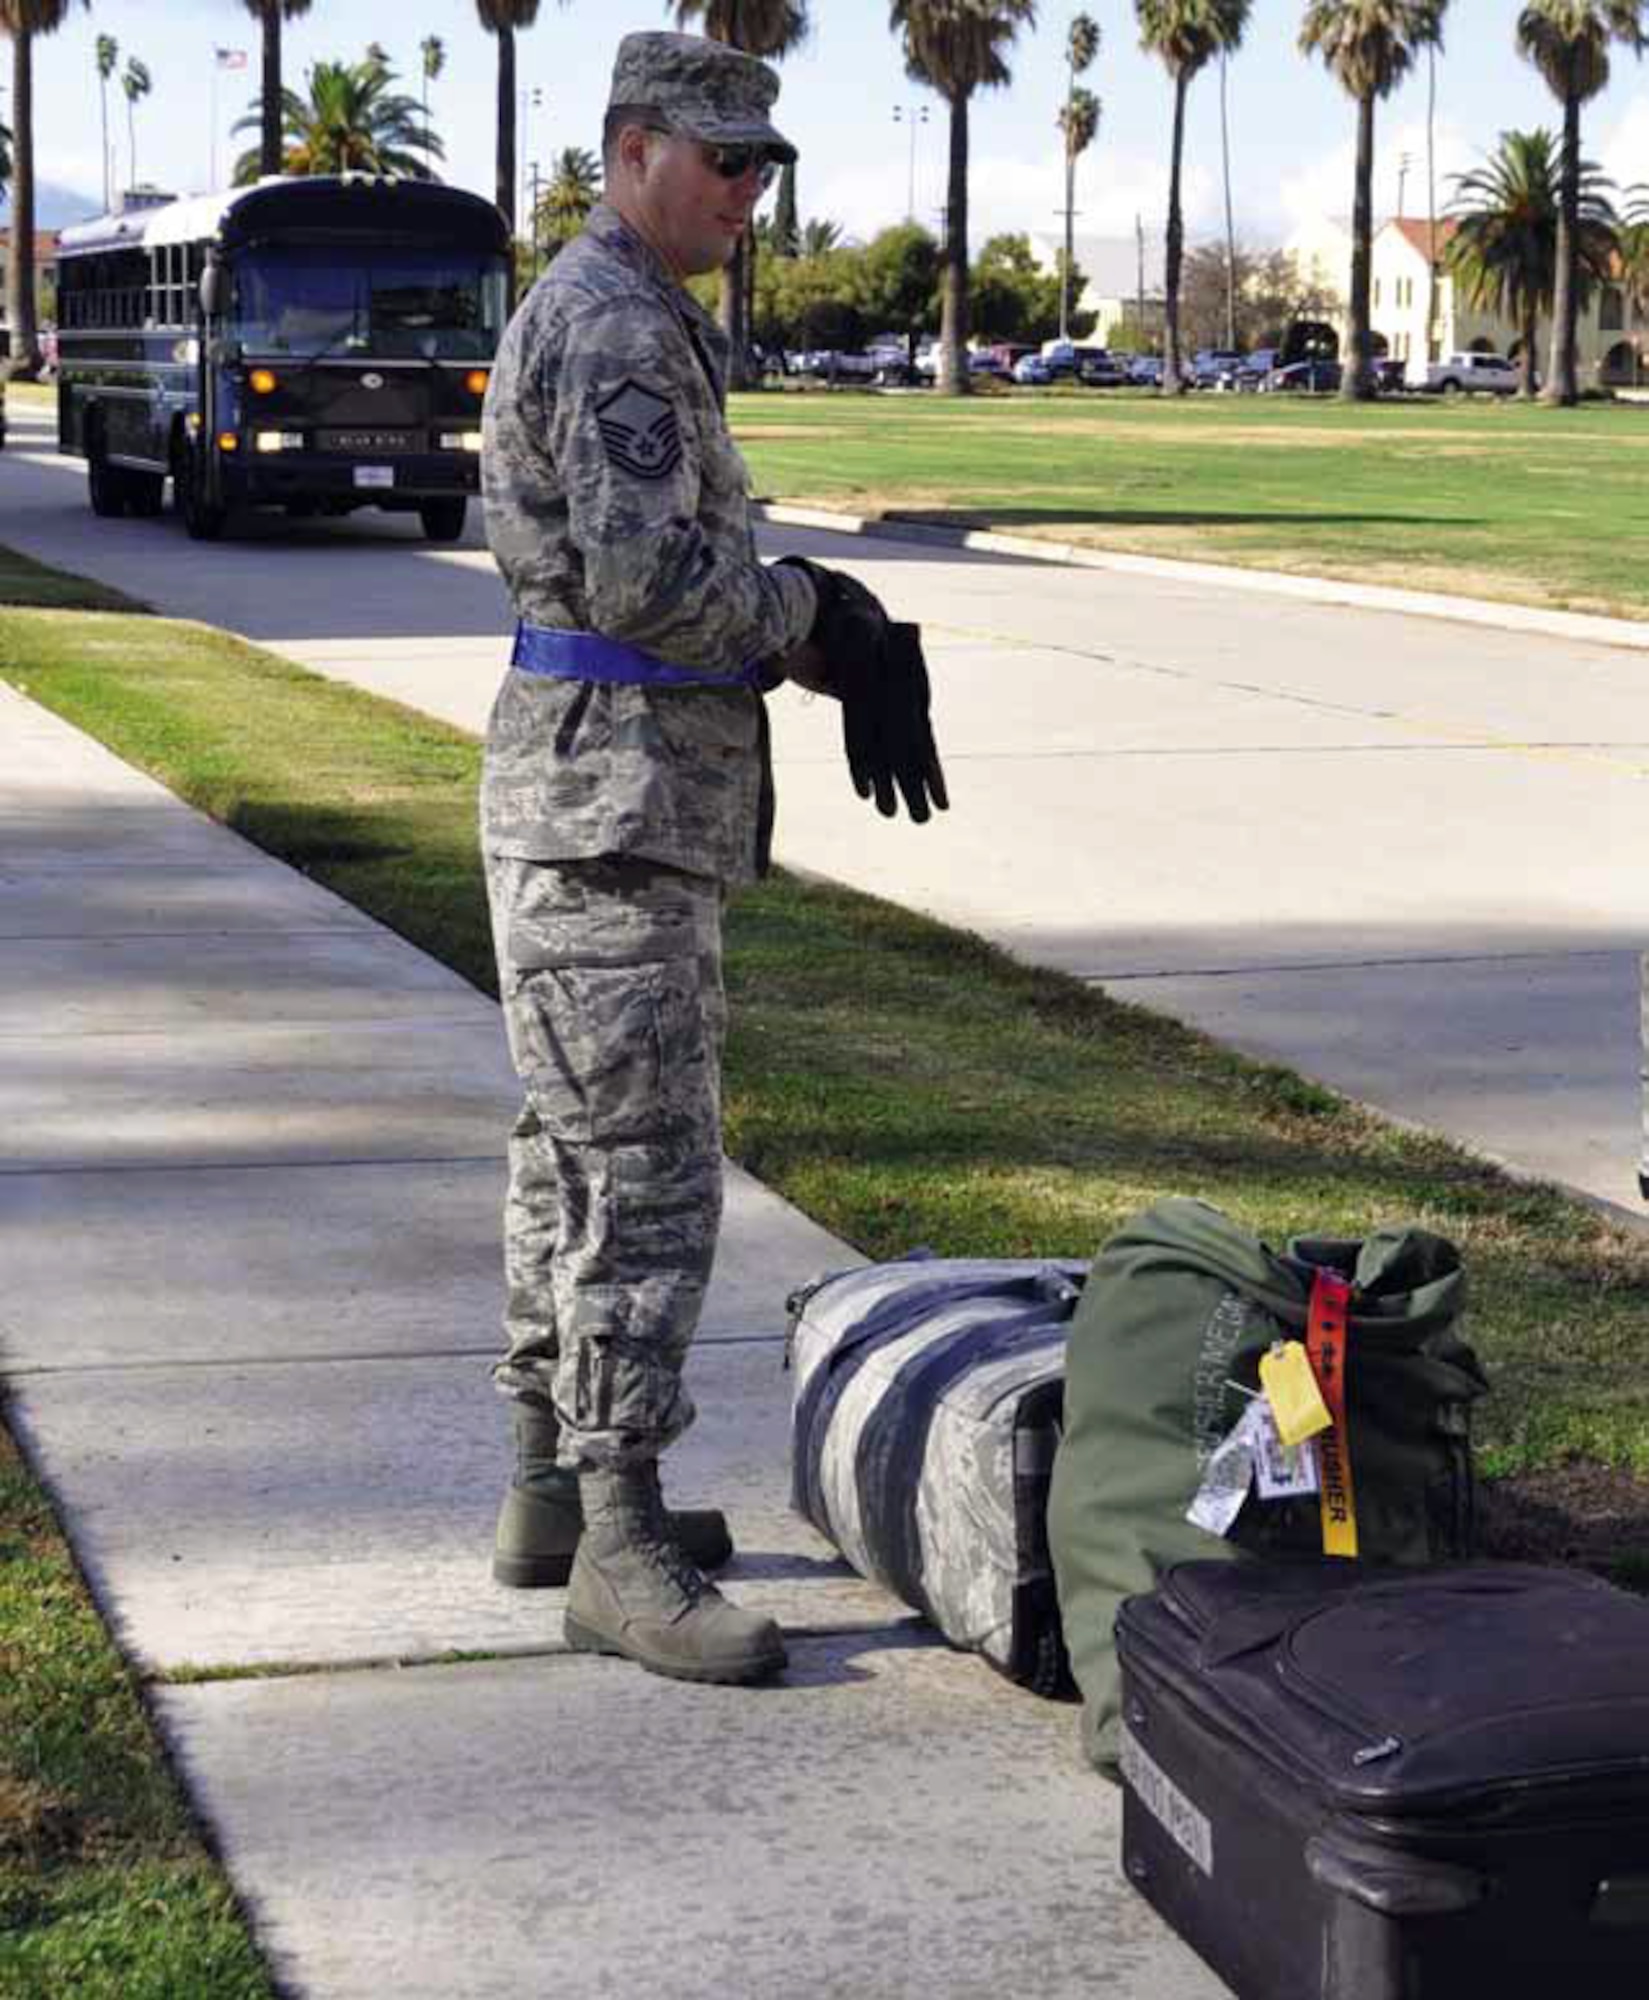 Master Sgt. John Hale, 452d AMW historian, prepares to load bags on a truck as he awaits bus transportation to the deployment processing area. Gloves are required to be worn when loading bags. (U.S. Air Force photo by Master Sgt. Linda Welz)